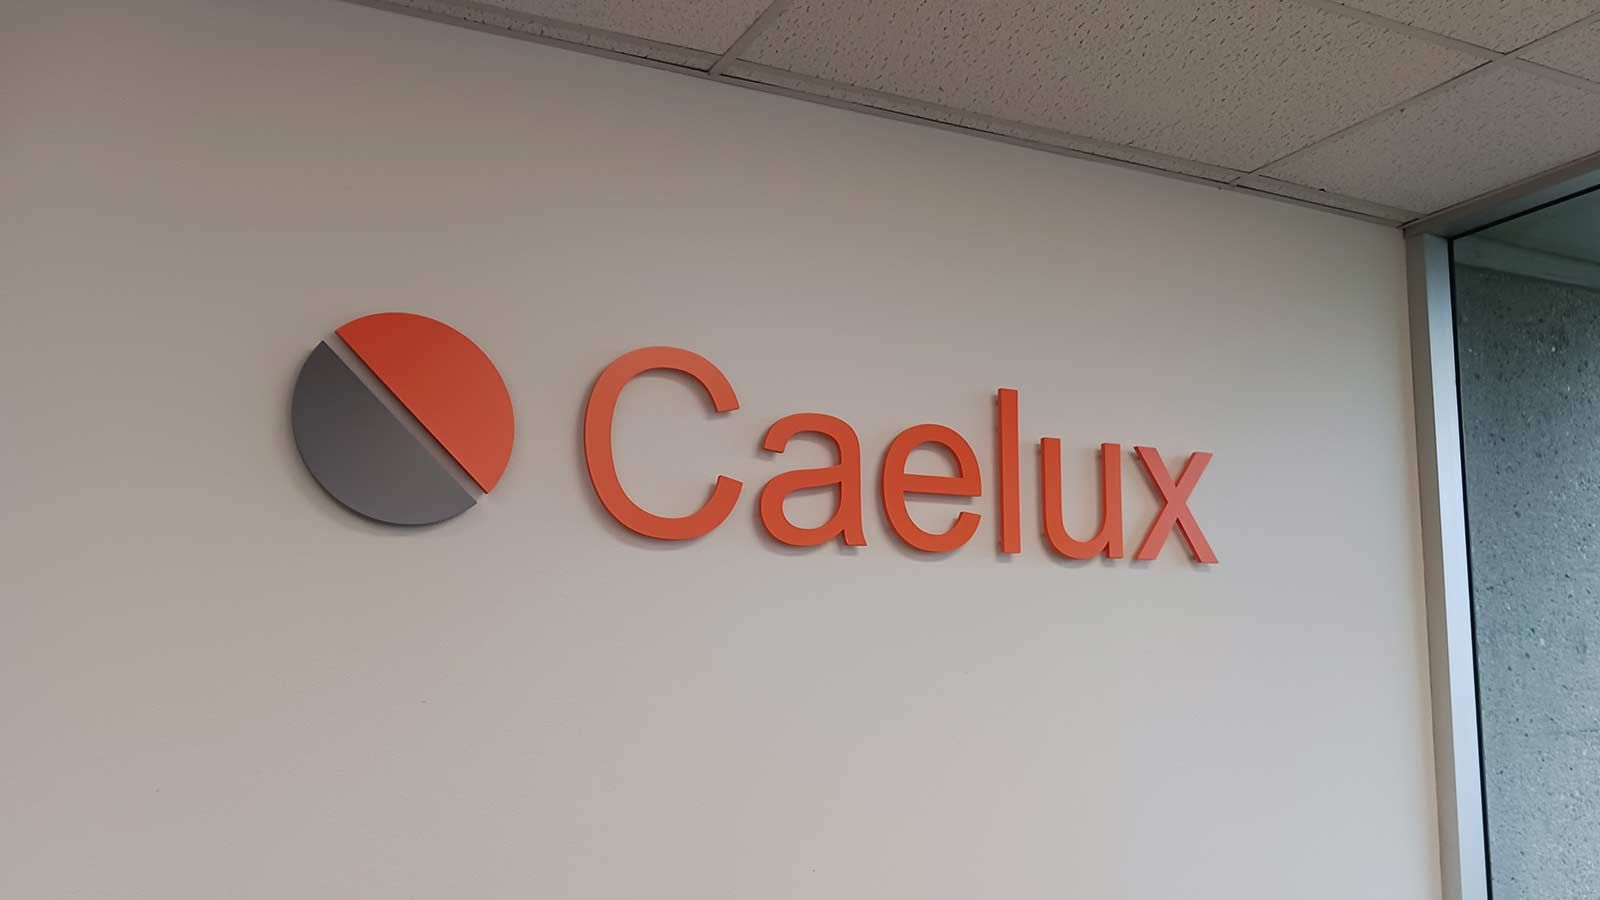 Caelux Corporation interior sign attached to the wall